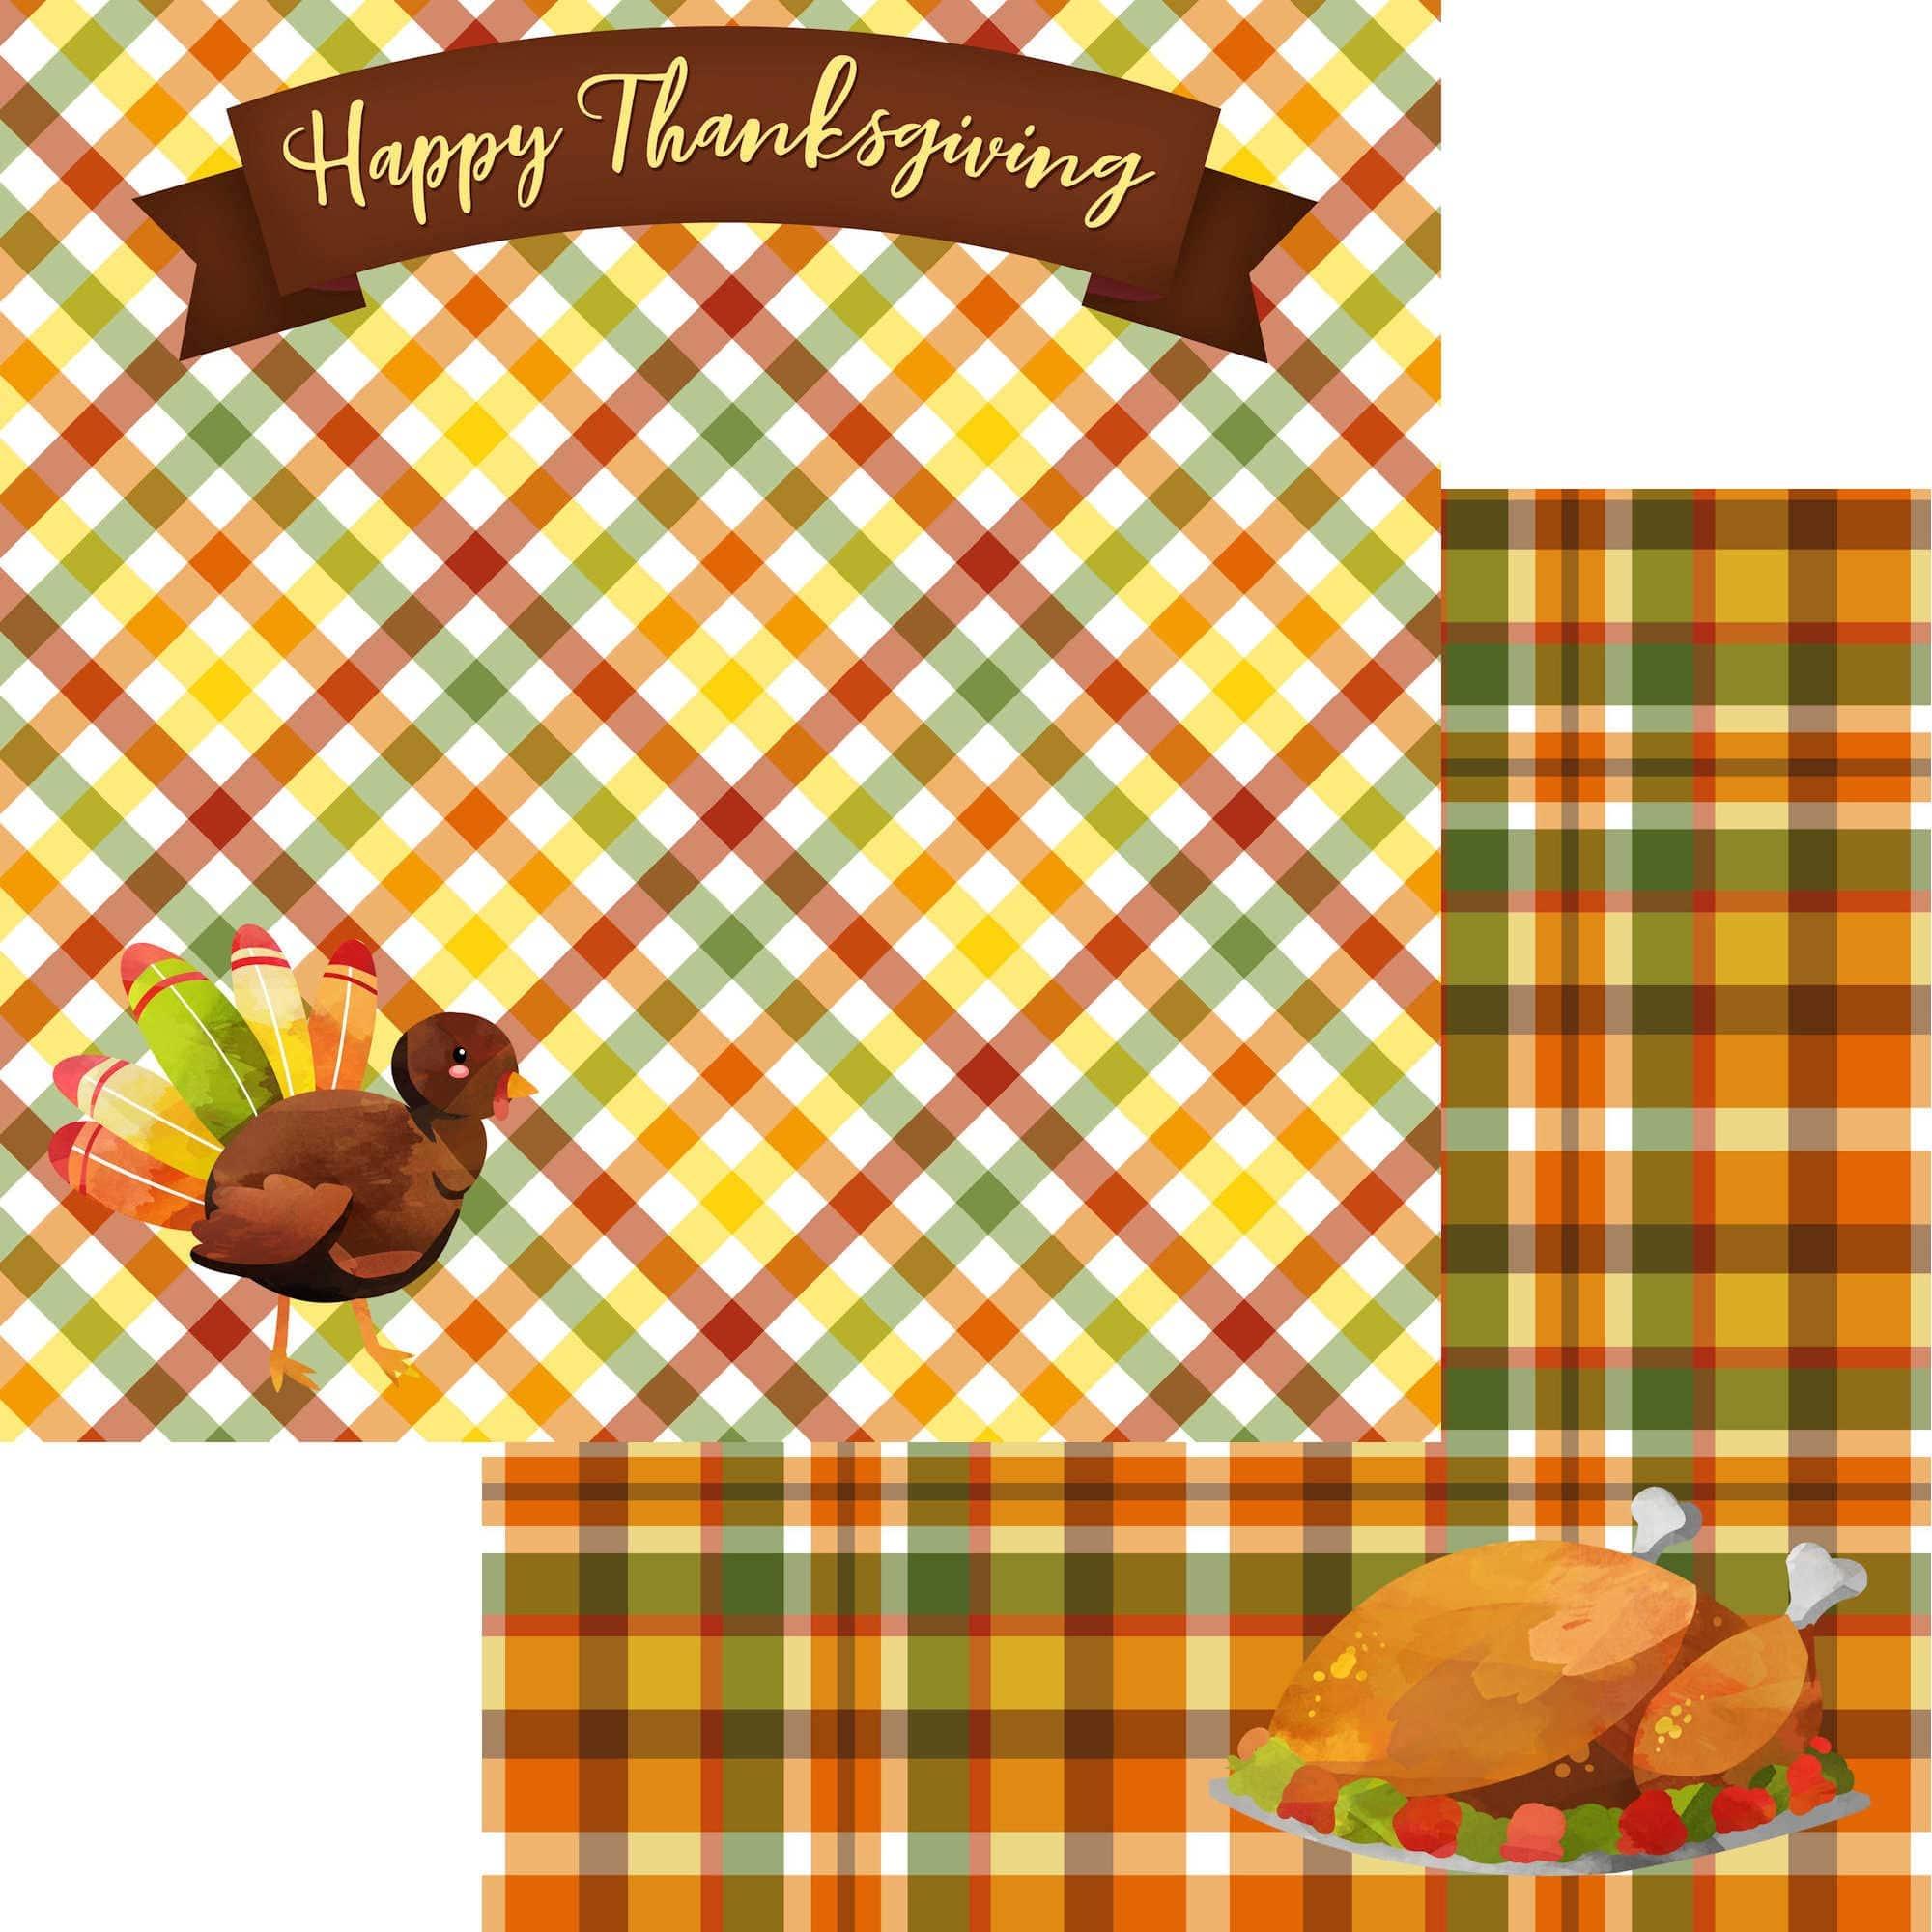 Turkey Time Collection Give Thanks 12 x 12 Double-Sided Scrapbook Paper by SSC Designs - Scrapbook Supply Companies